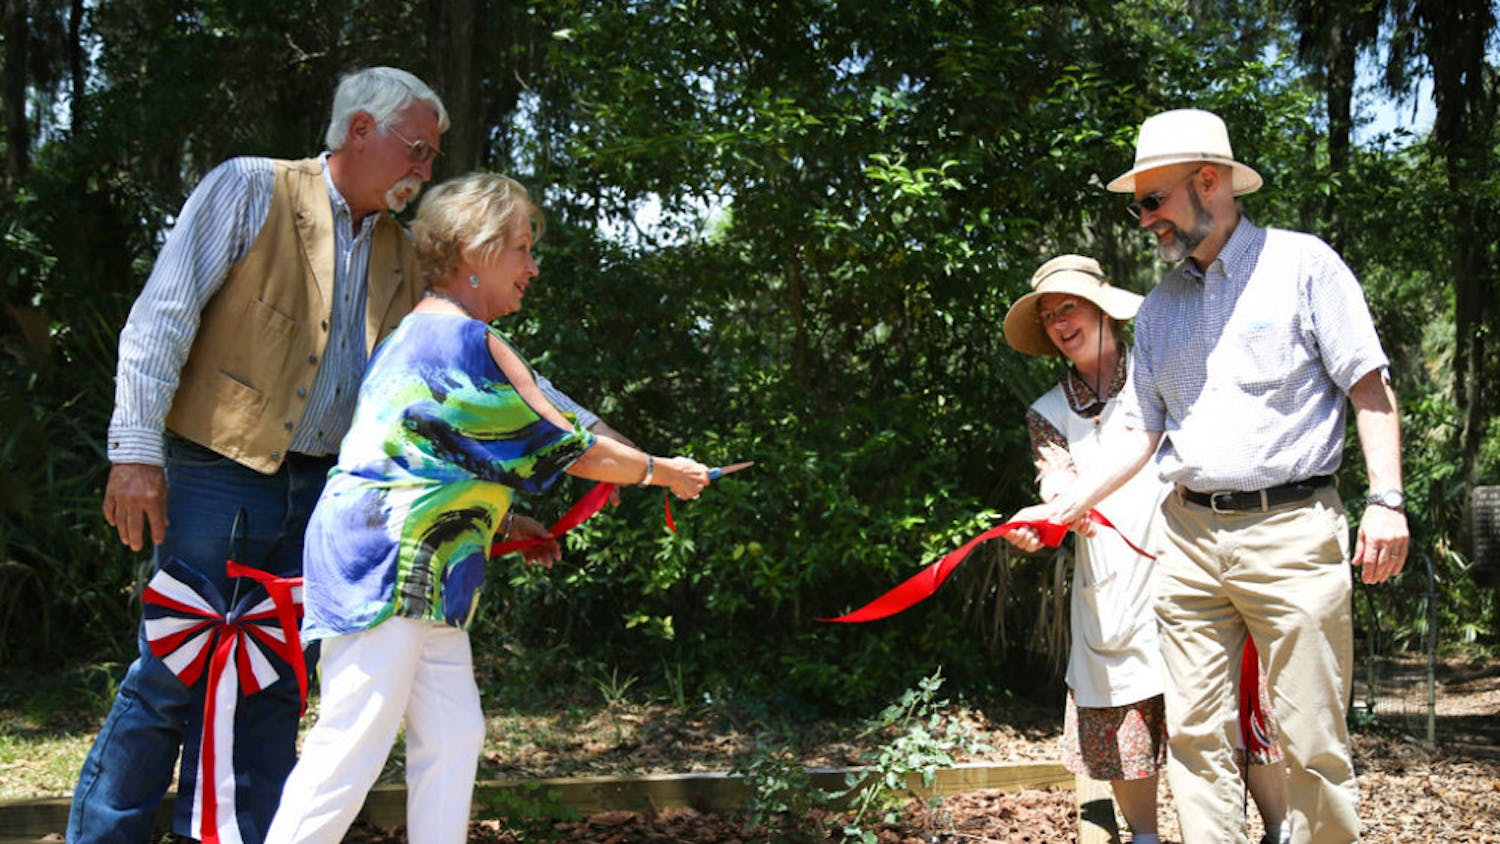 From left to right, Art Wade, Elaine Spencer, Valerie Rivers and Keith Honeycutt cut the ribbon to usher in the Marjorie Kinnan Rawlings rose. It was dedicated to the author on Sunday afternoon at the Marjorie Kinnan Rawlings House and Farm.